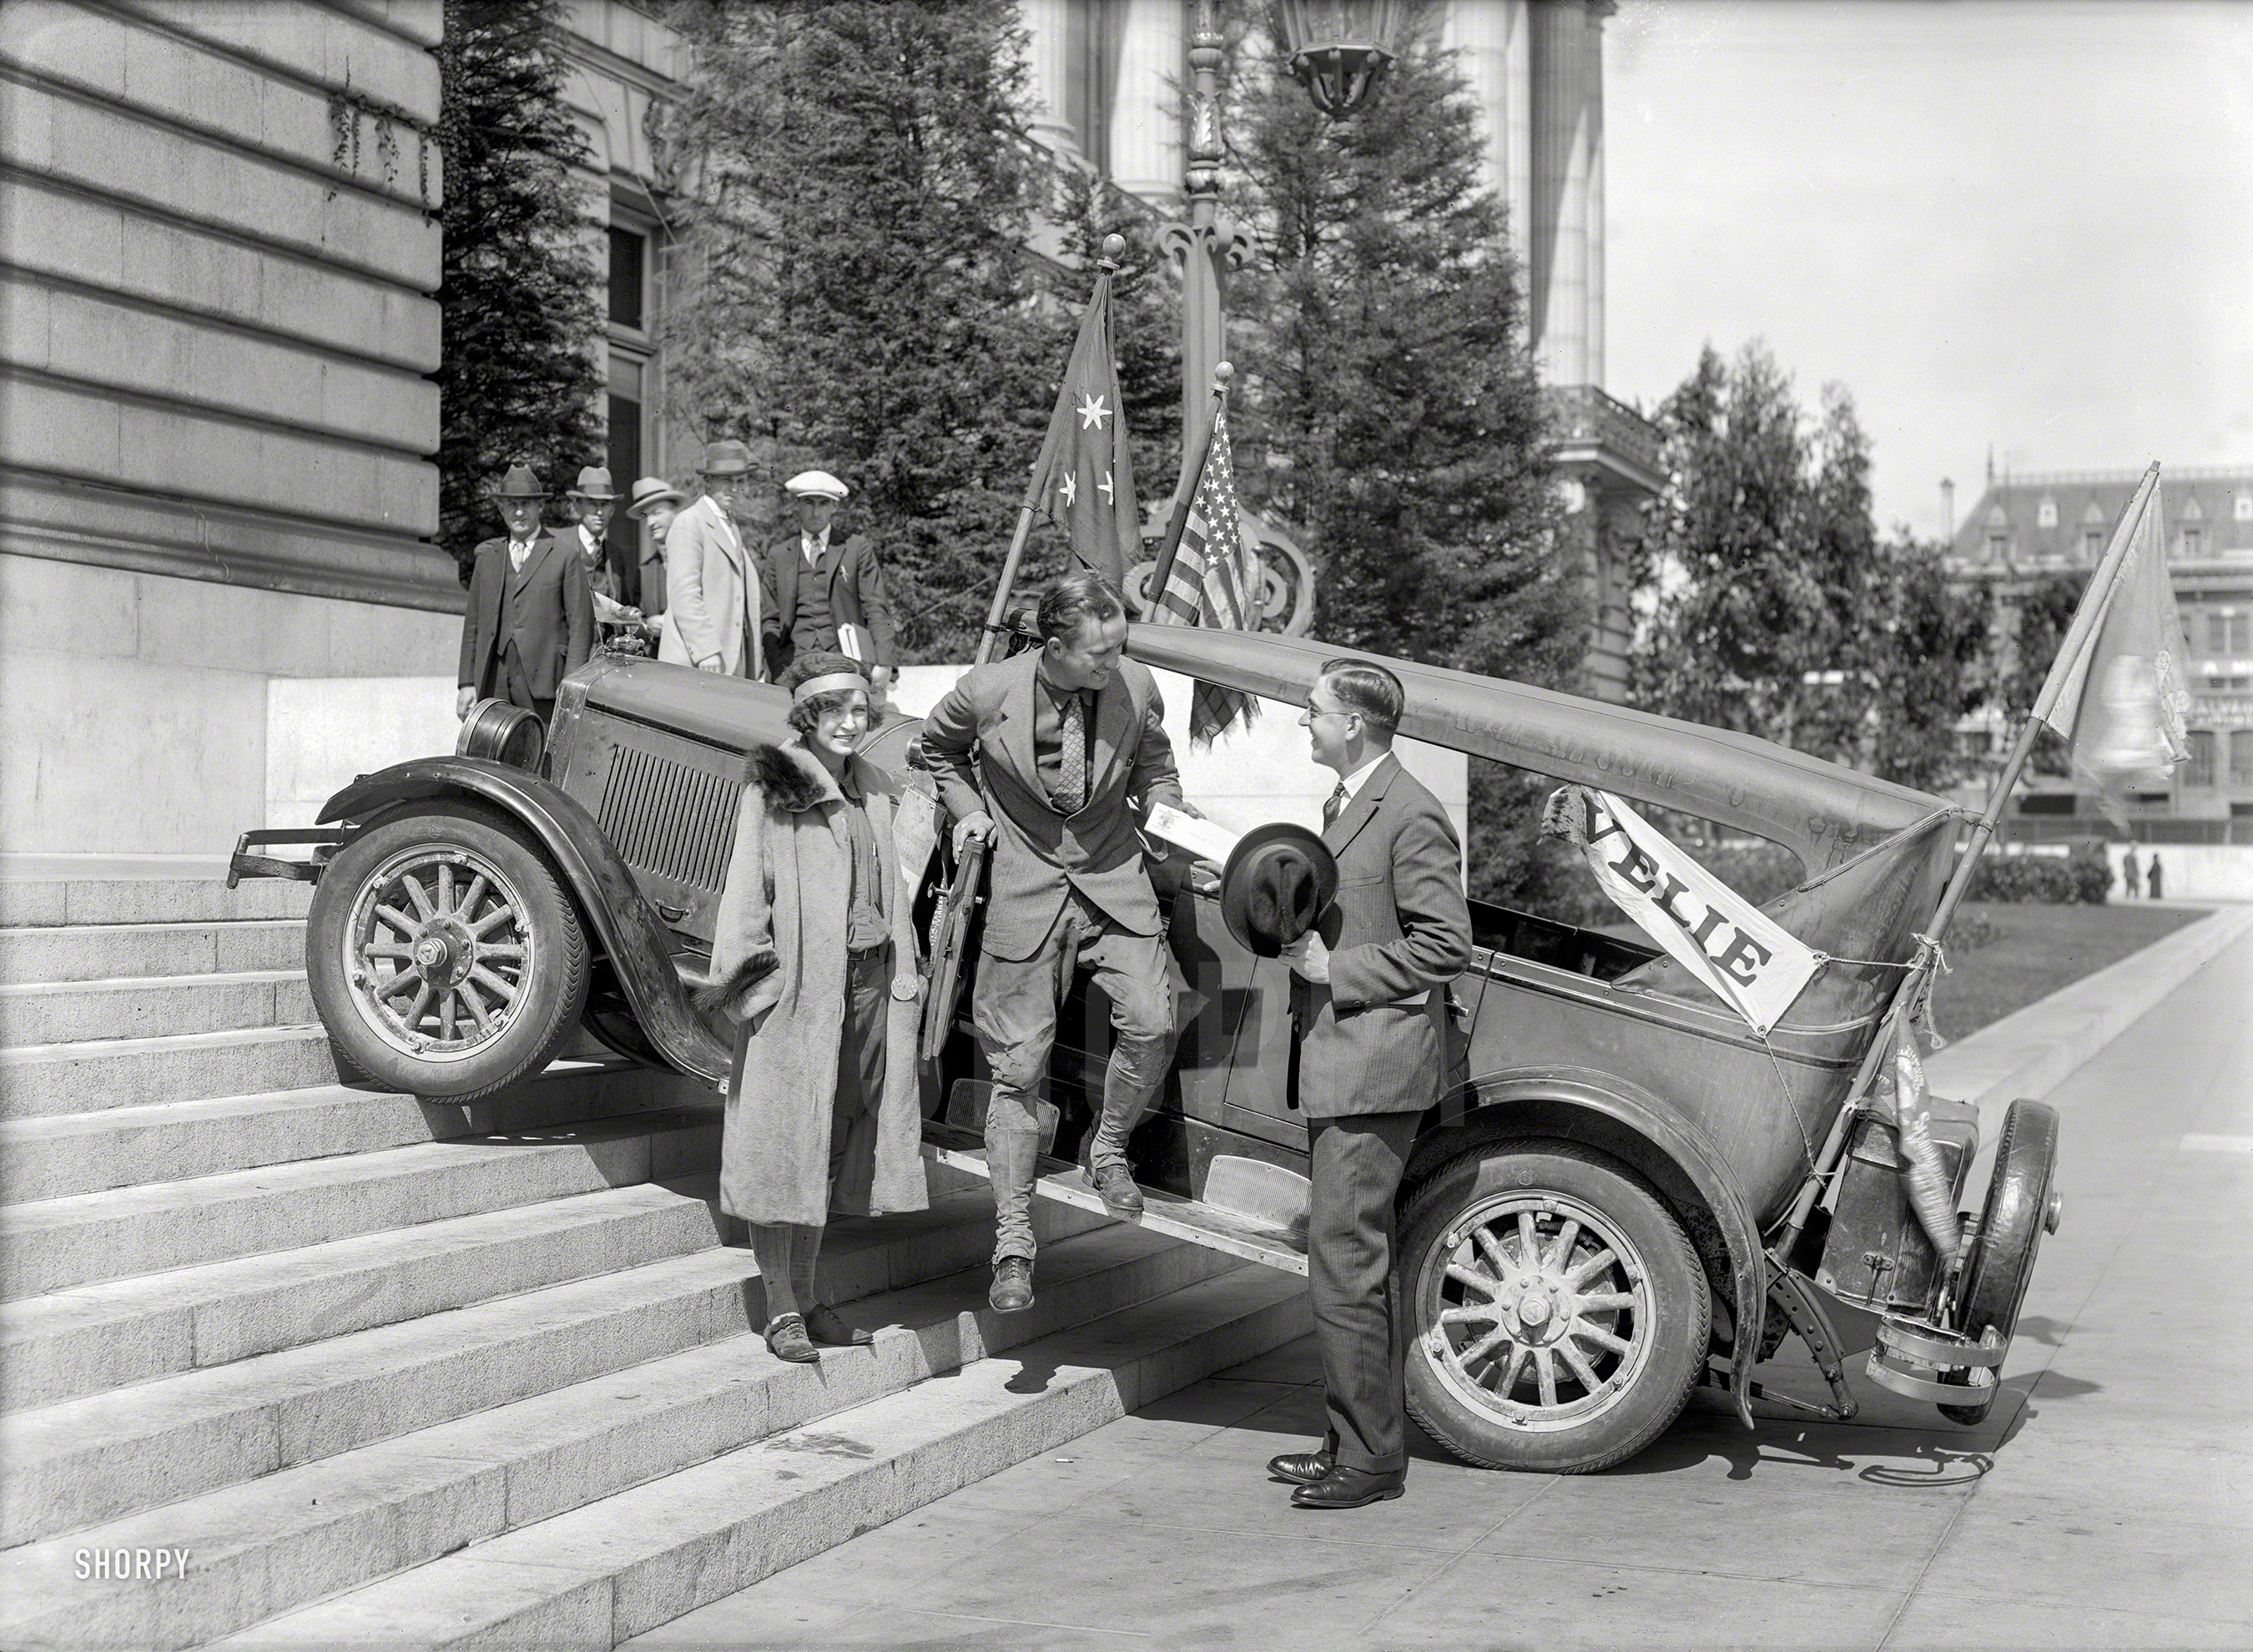 San Francisco circa 1925. "Velie touring car ascending steps." As well as promoting the Philadelphia Sesquicentennial of 1926. 5x7 glass negative. View full size.